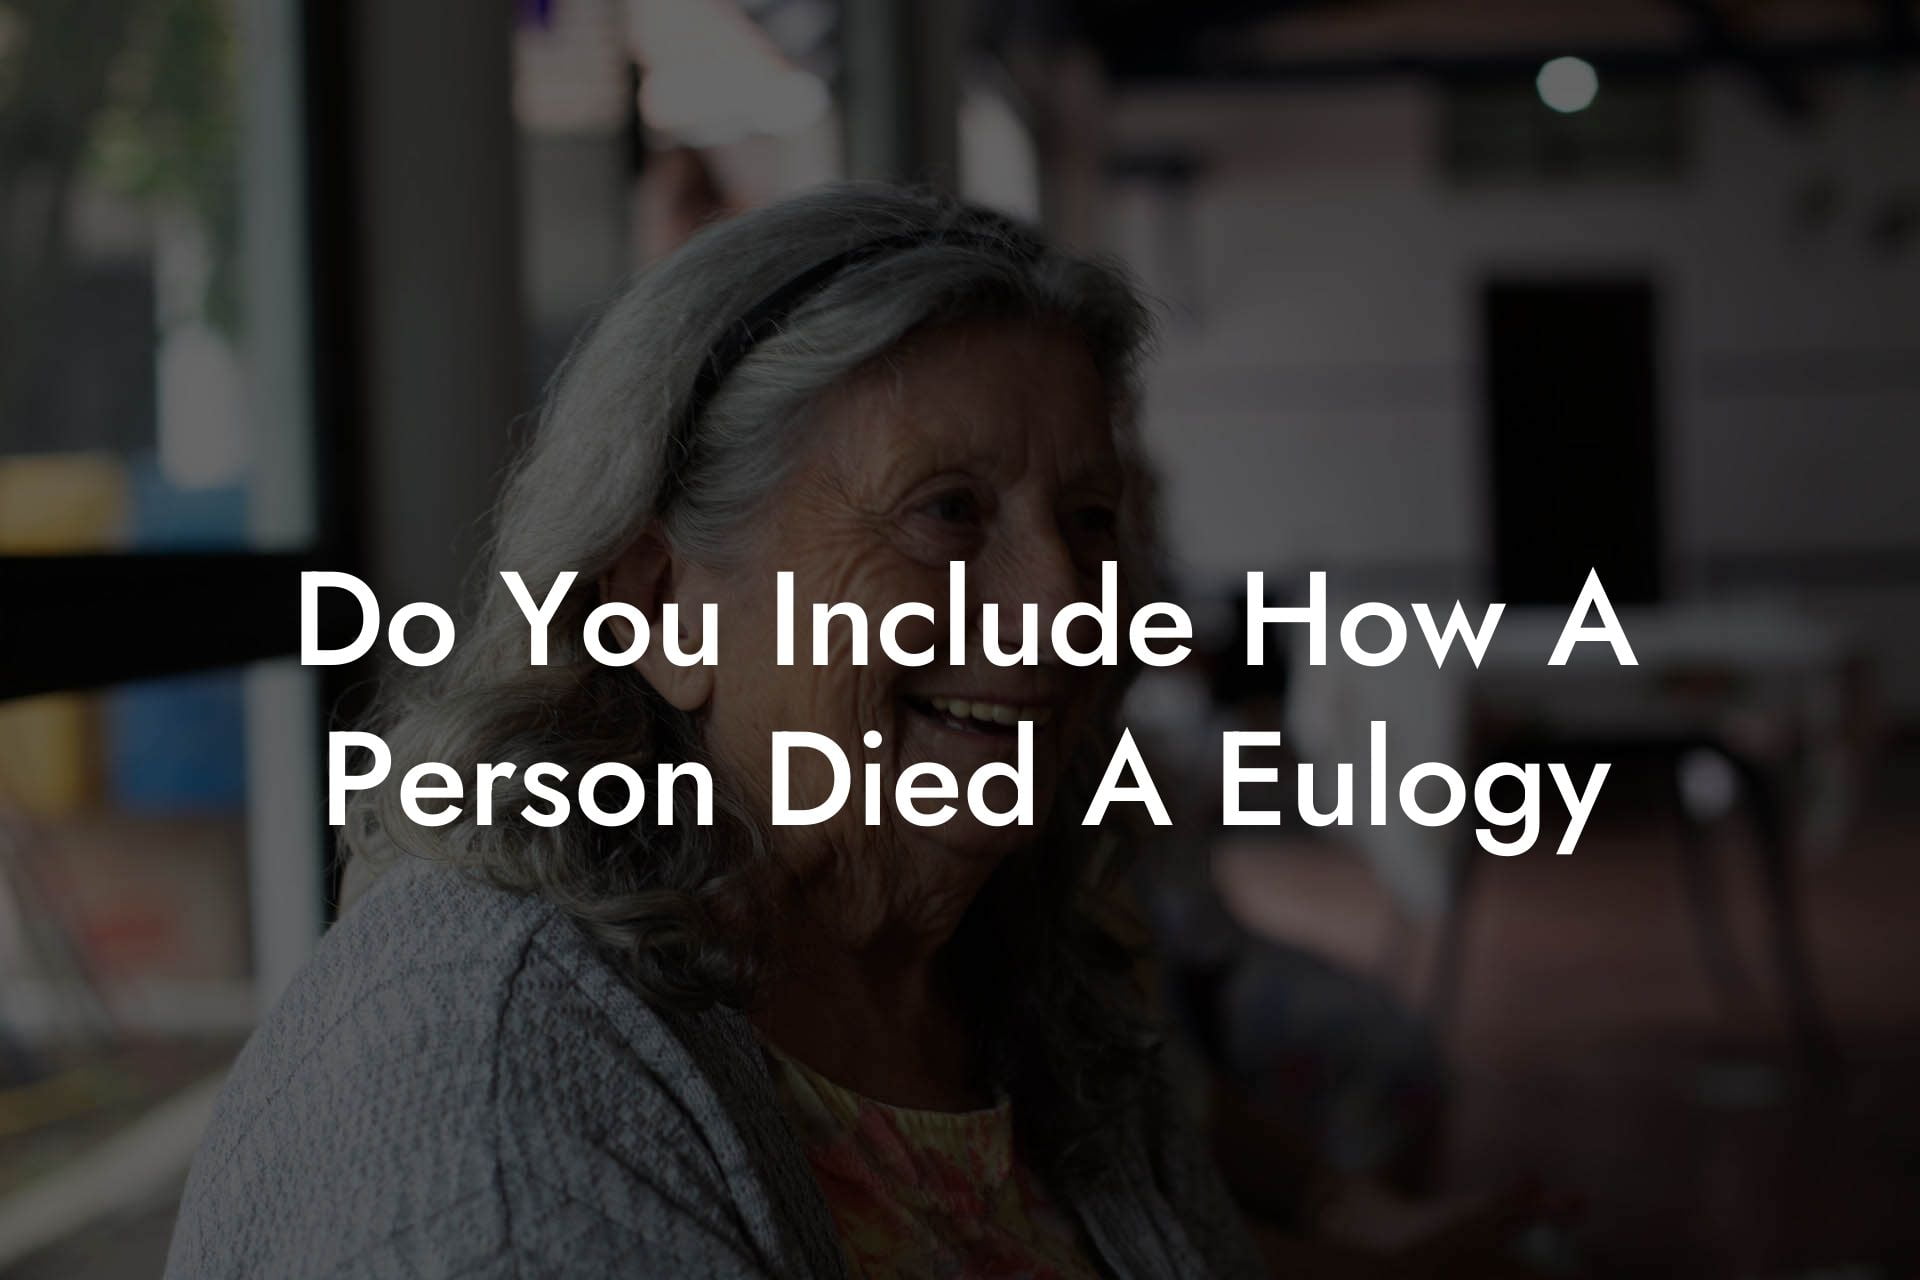 Do You Include How A Person Died A Eulogy